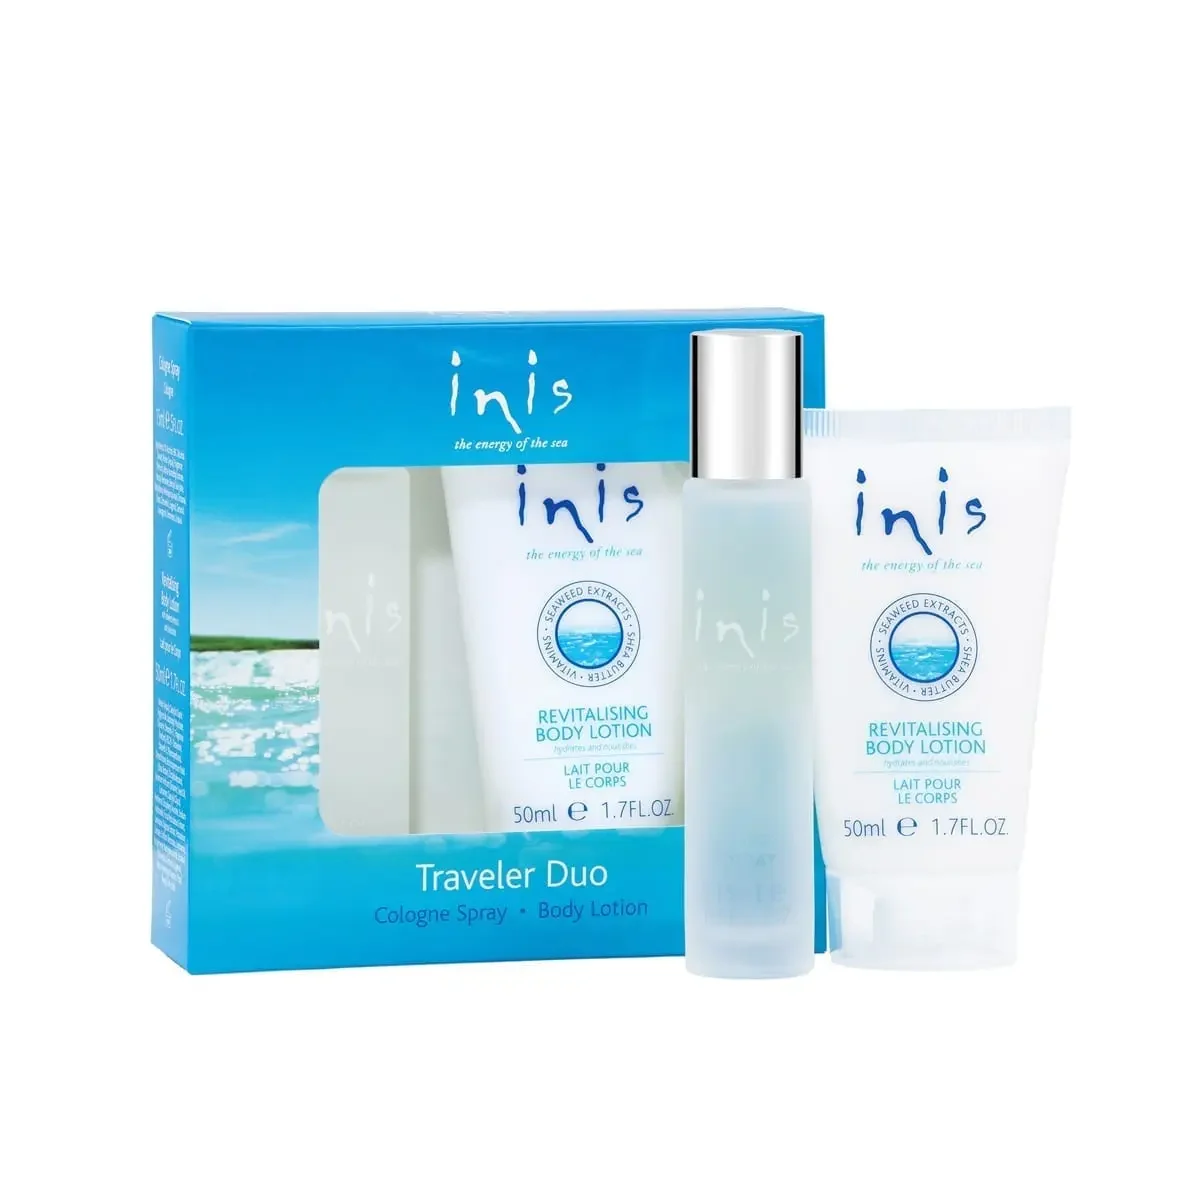 A box of inis skin care products.